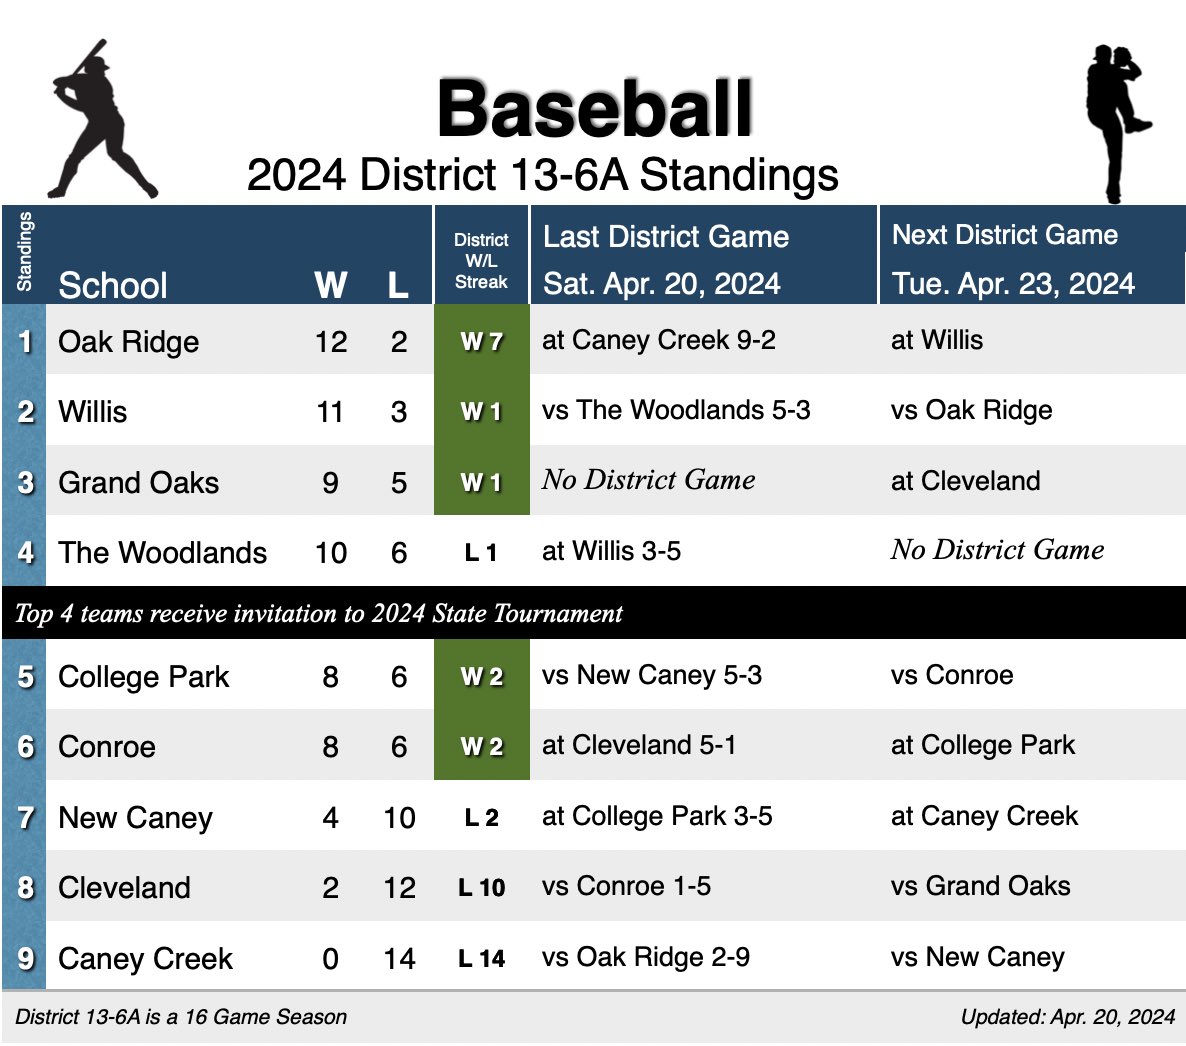 Baseball: District 13-6A standings as of April 22, 2024